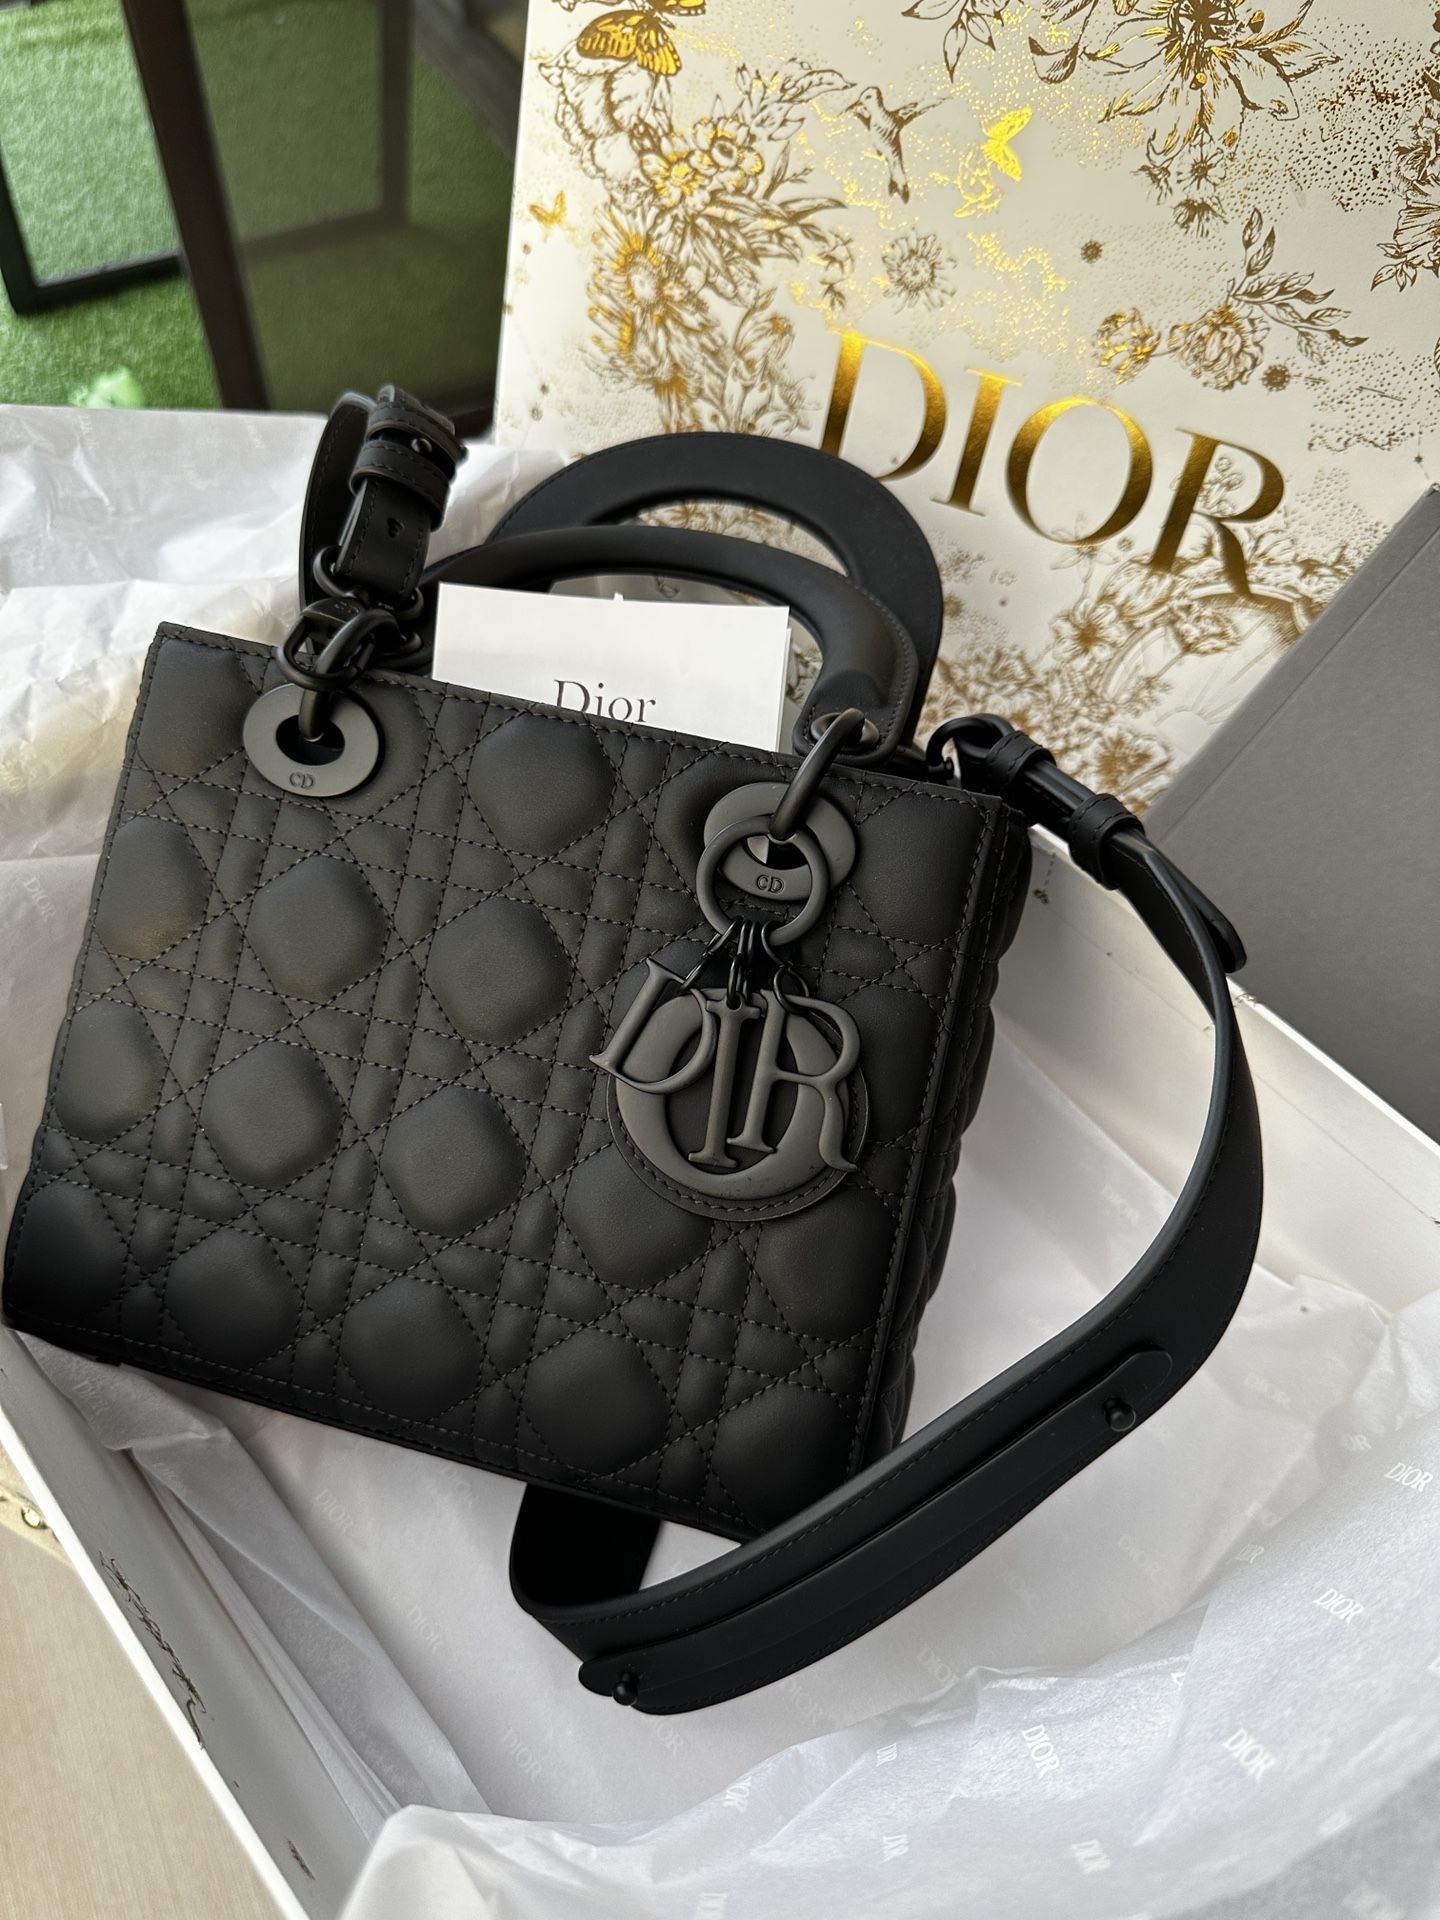 CHOSEN, Dior Lady Bag (2022), Available for Sale